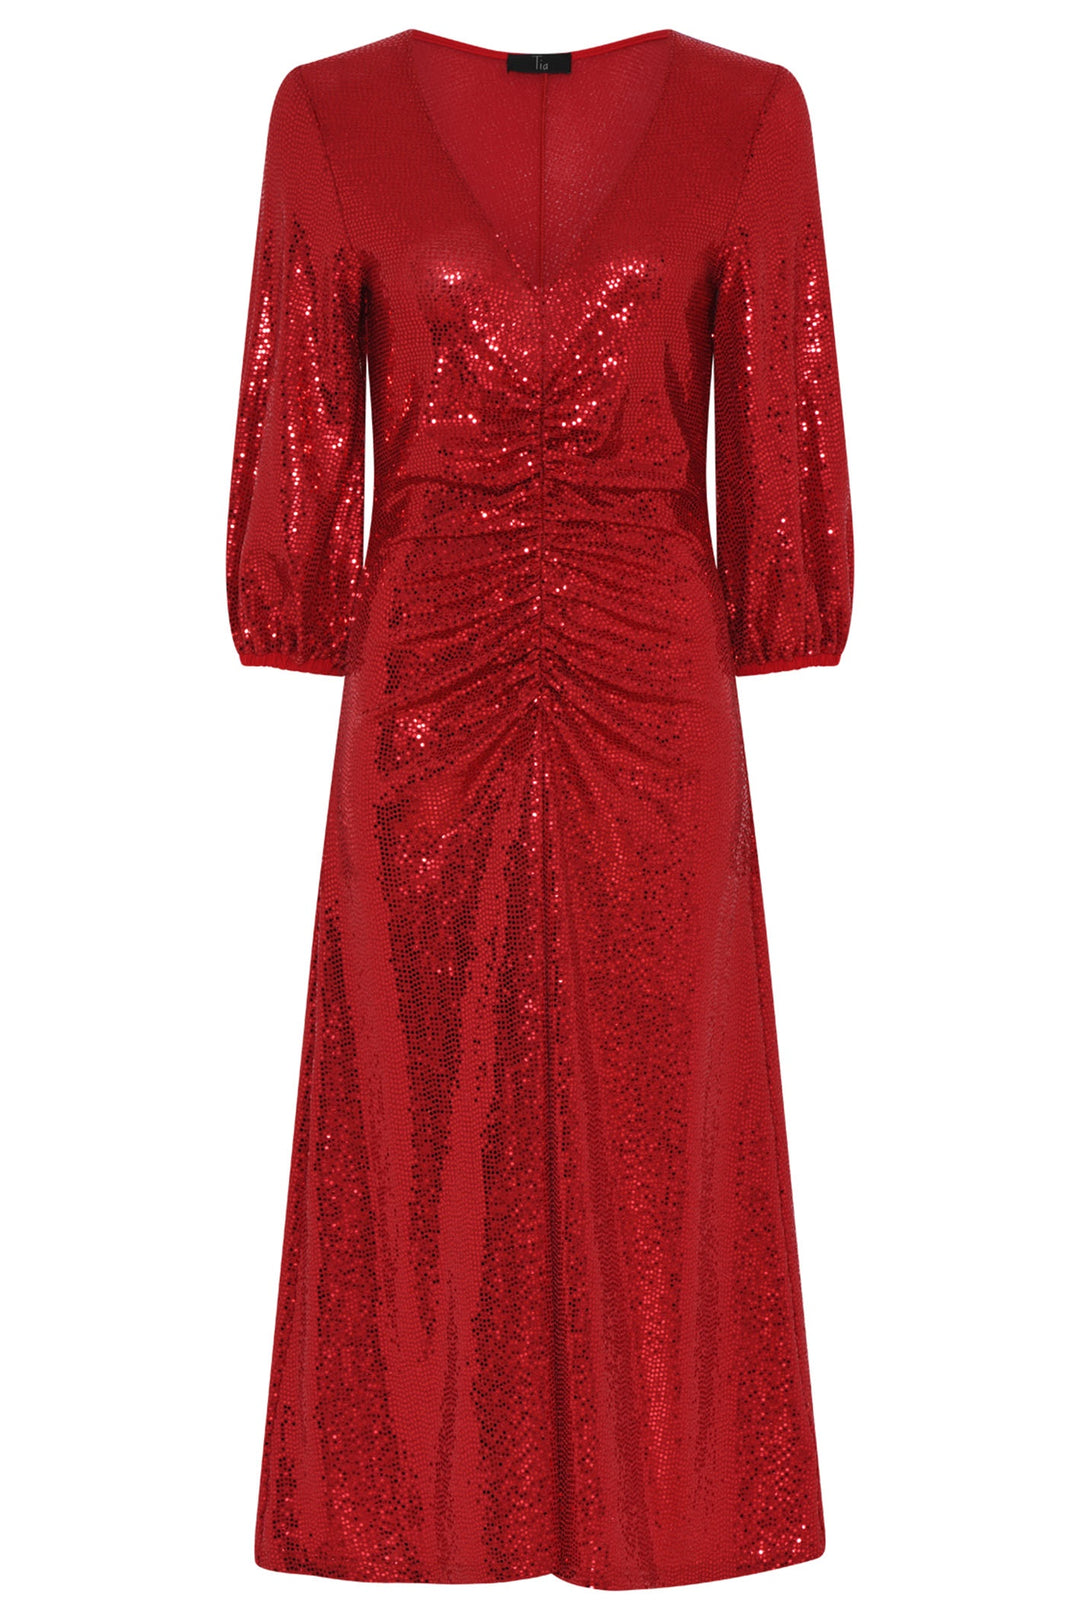 Tia 78519 Red Sequin Party Dress - Dotique Chesterfield